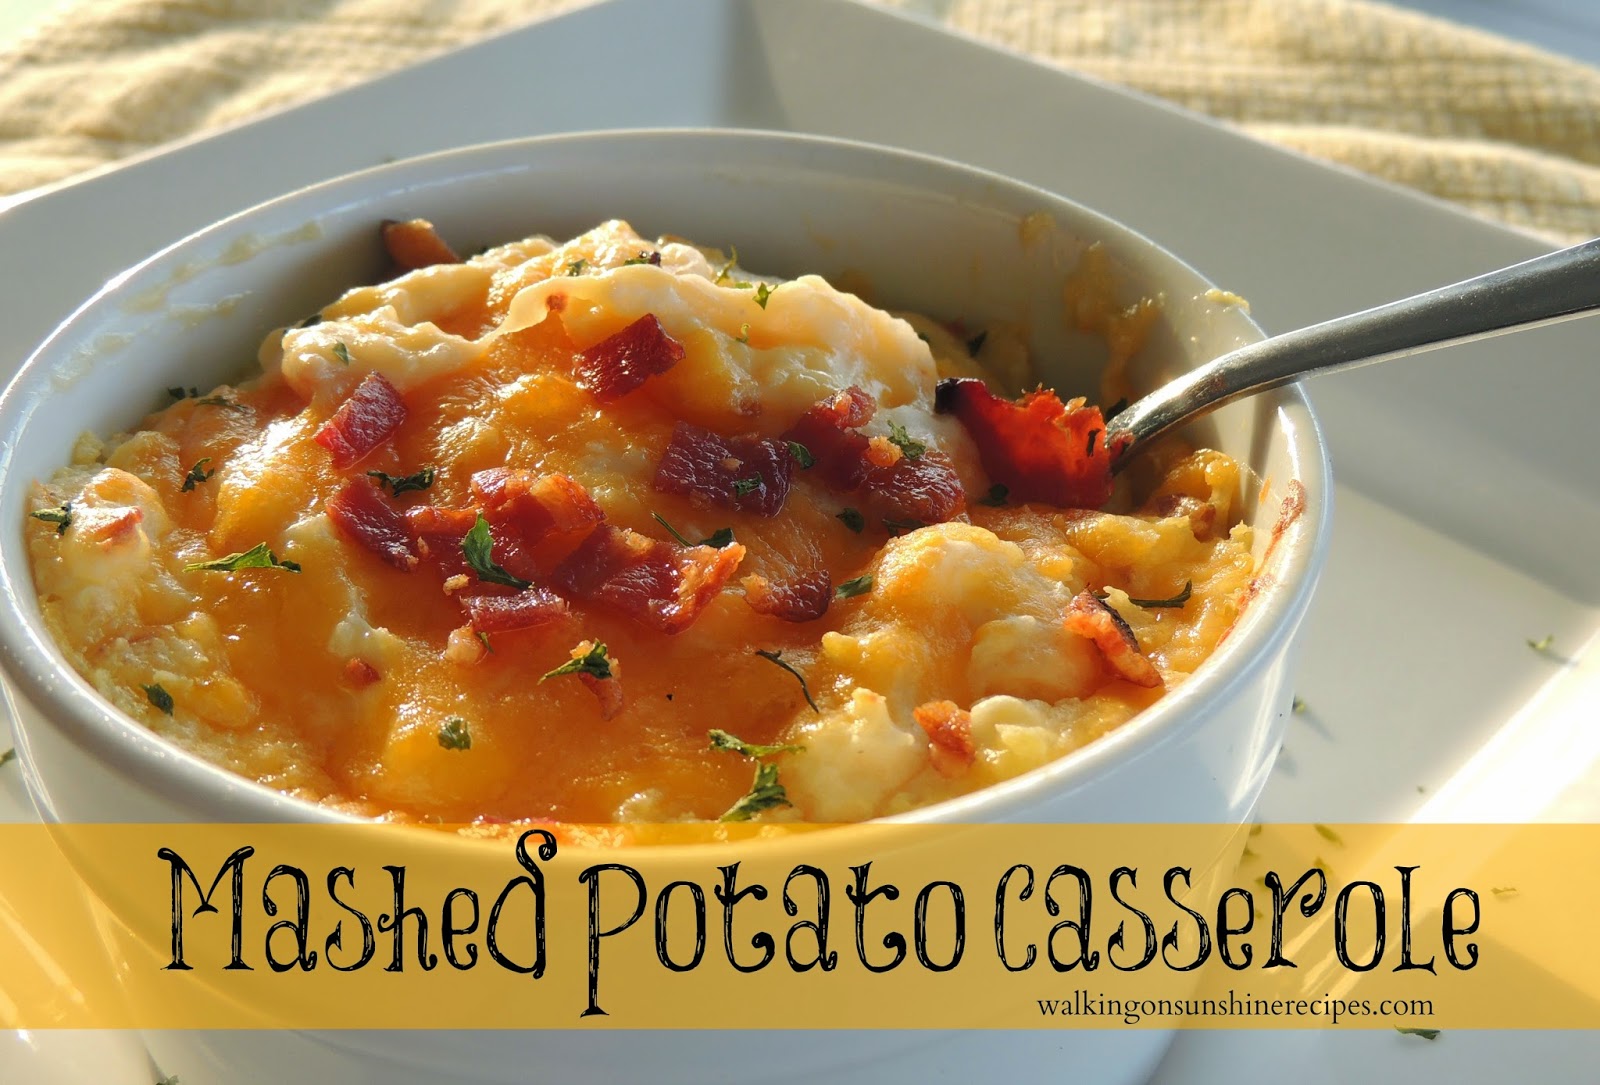 This mashed potato casserole is the only way my teenage son will eat mashed potatoes.  Come see the easy recipe on Walking on Sunshine Recipes! 